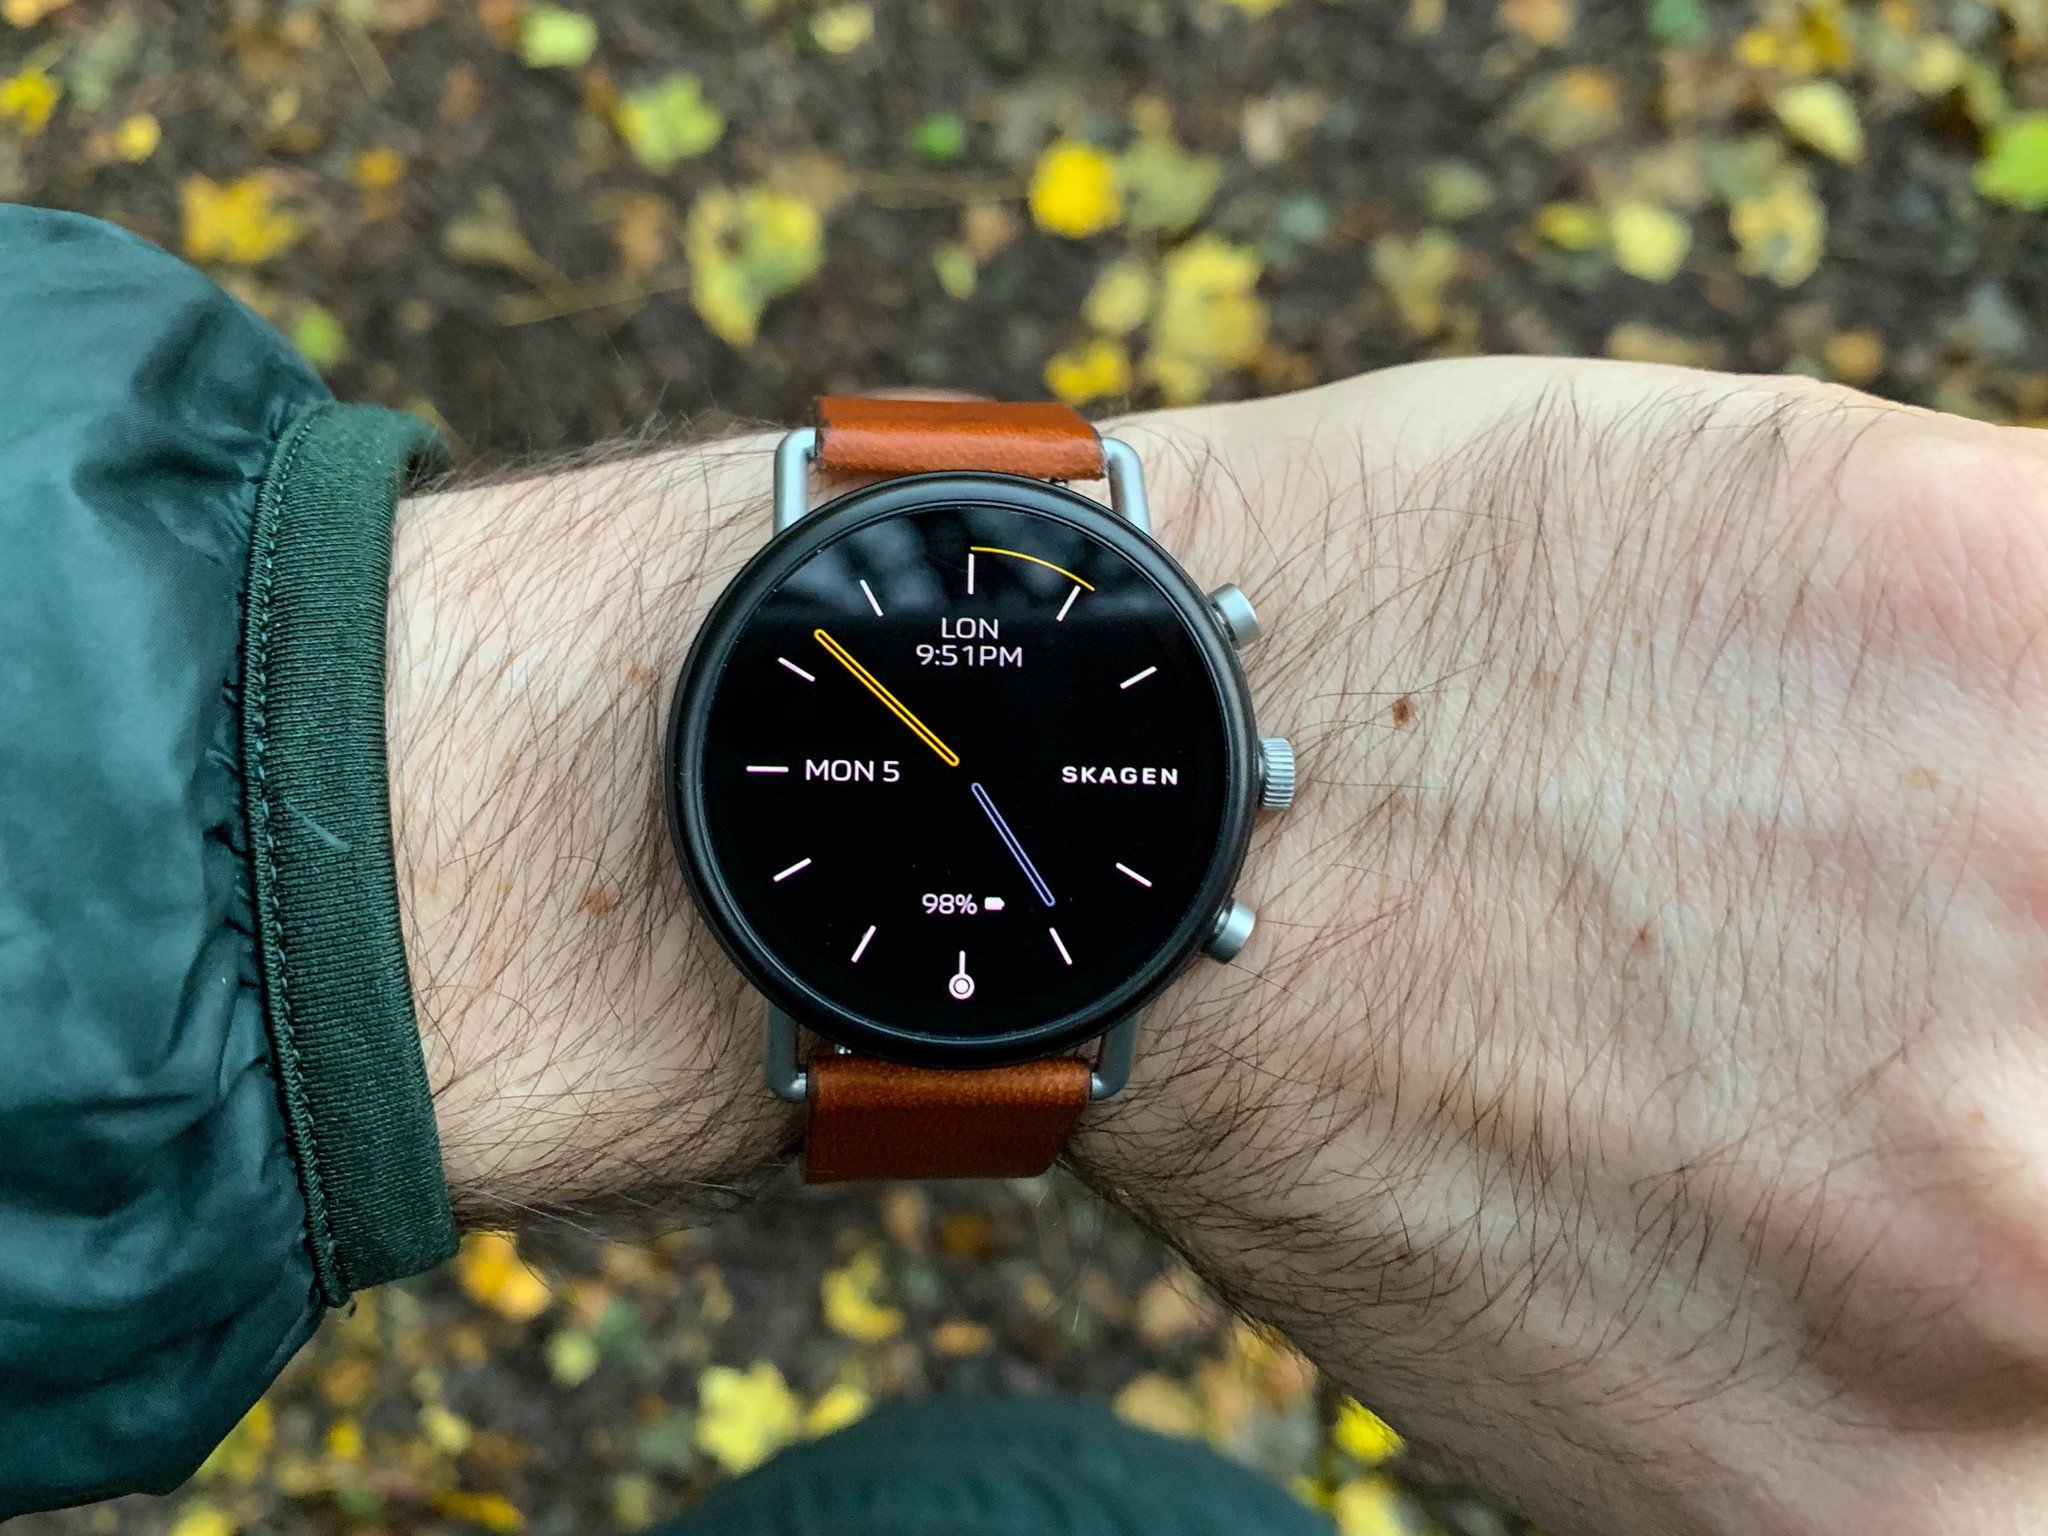 Skagen Falster 2 review: An flawed smartwatch that's easy to love | Android Central